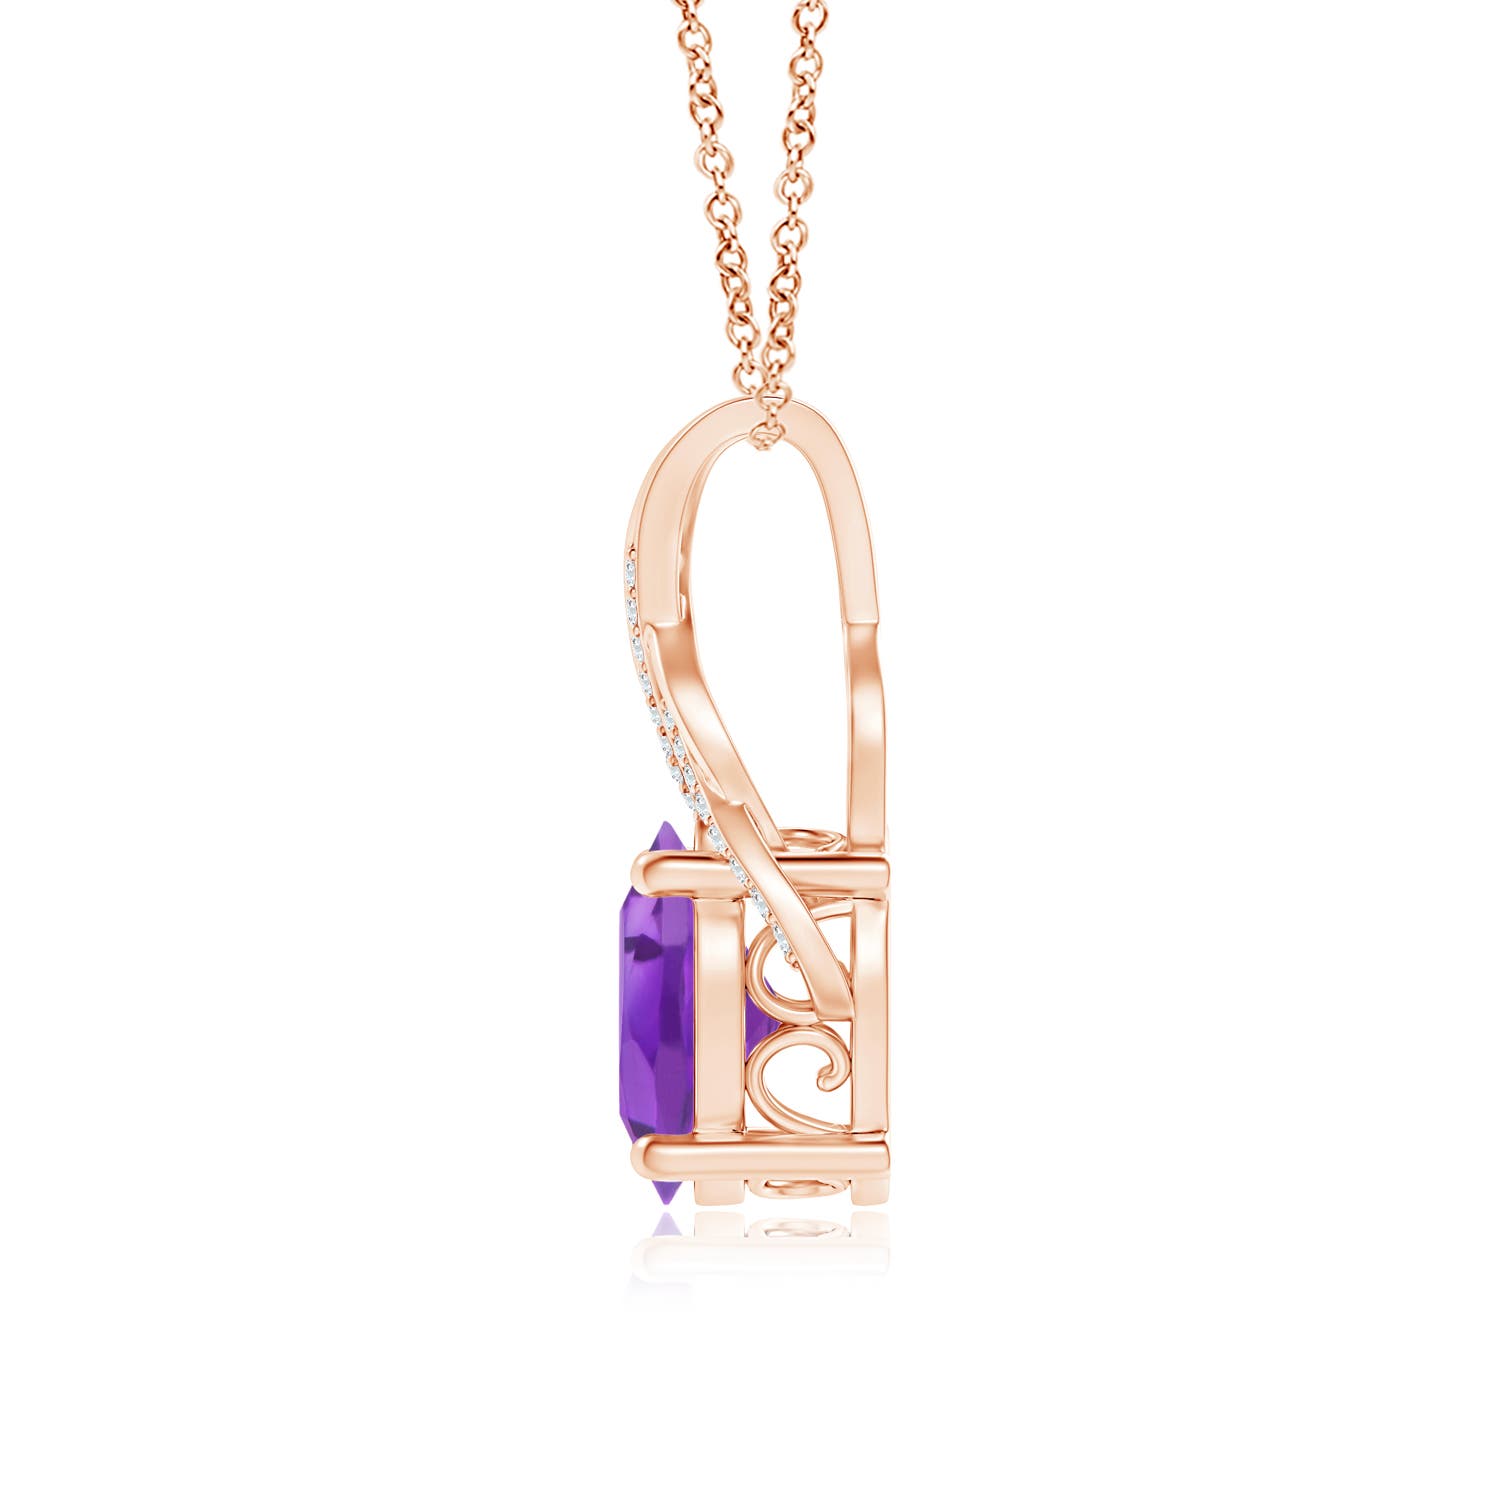 AA - Amethyst / 4.43 CT / 14 KT Rose Gold